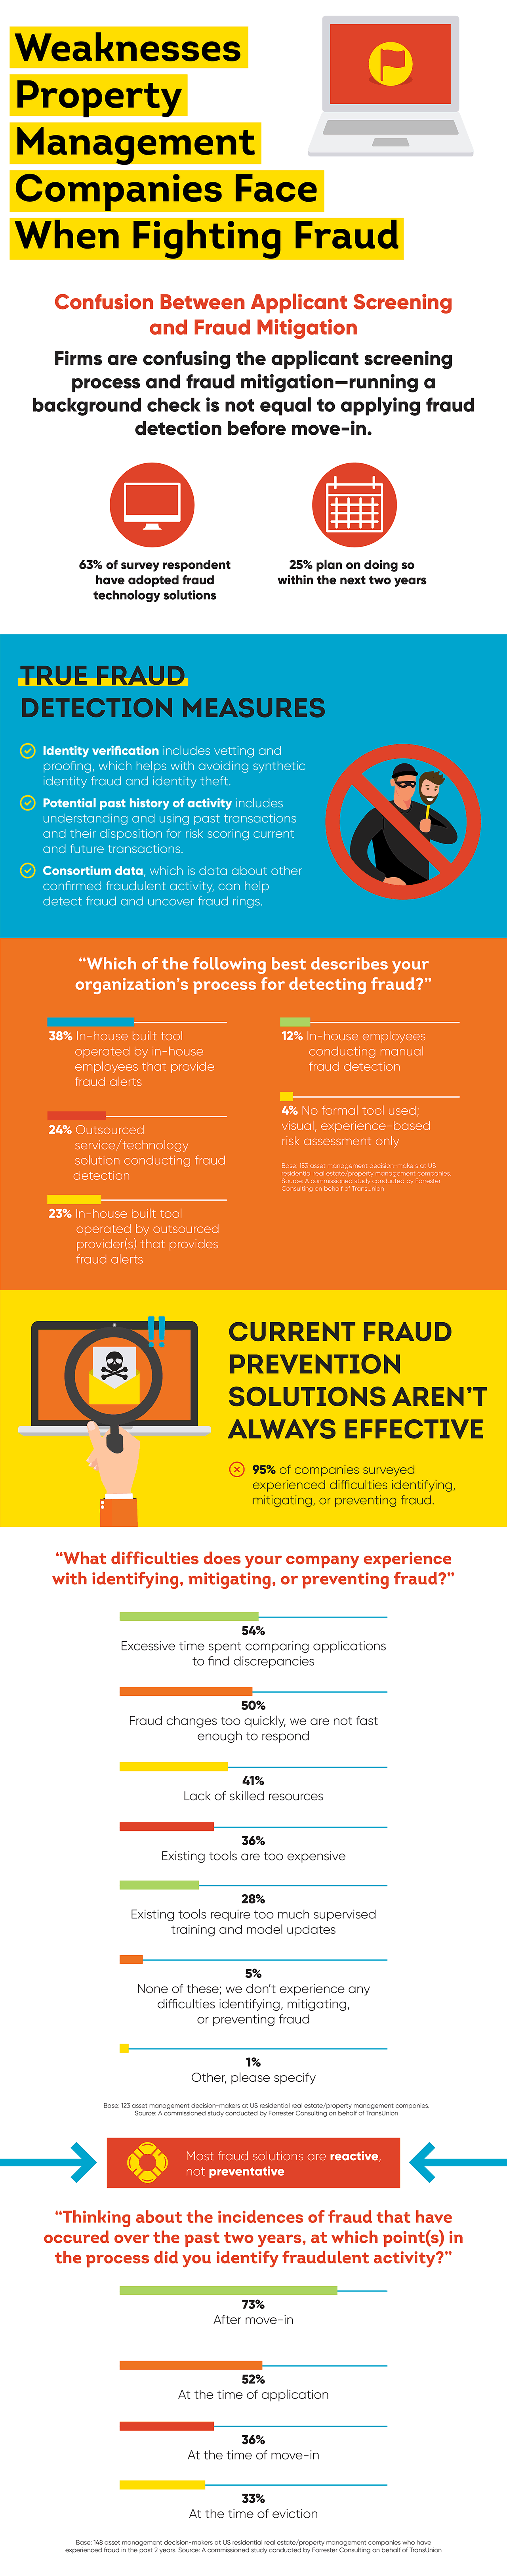 Weakness property management companies fighting fraud & confusion between applicant screening and fraud mitigation infographic